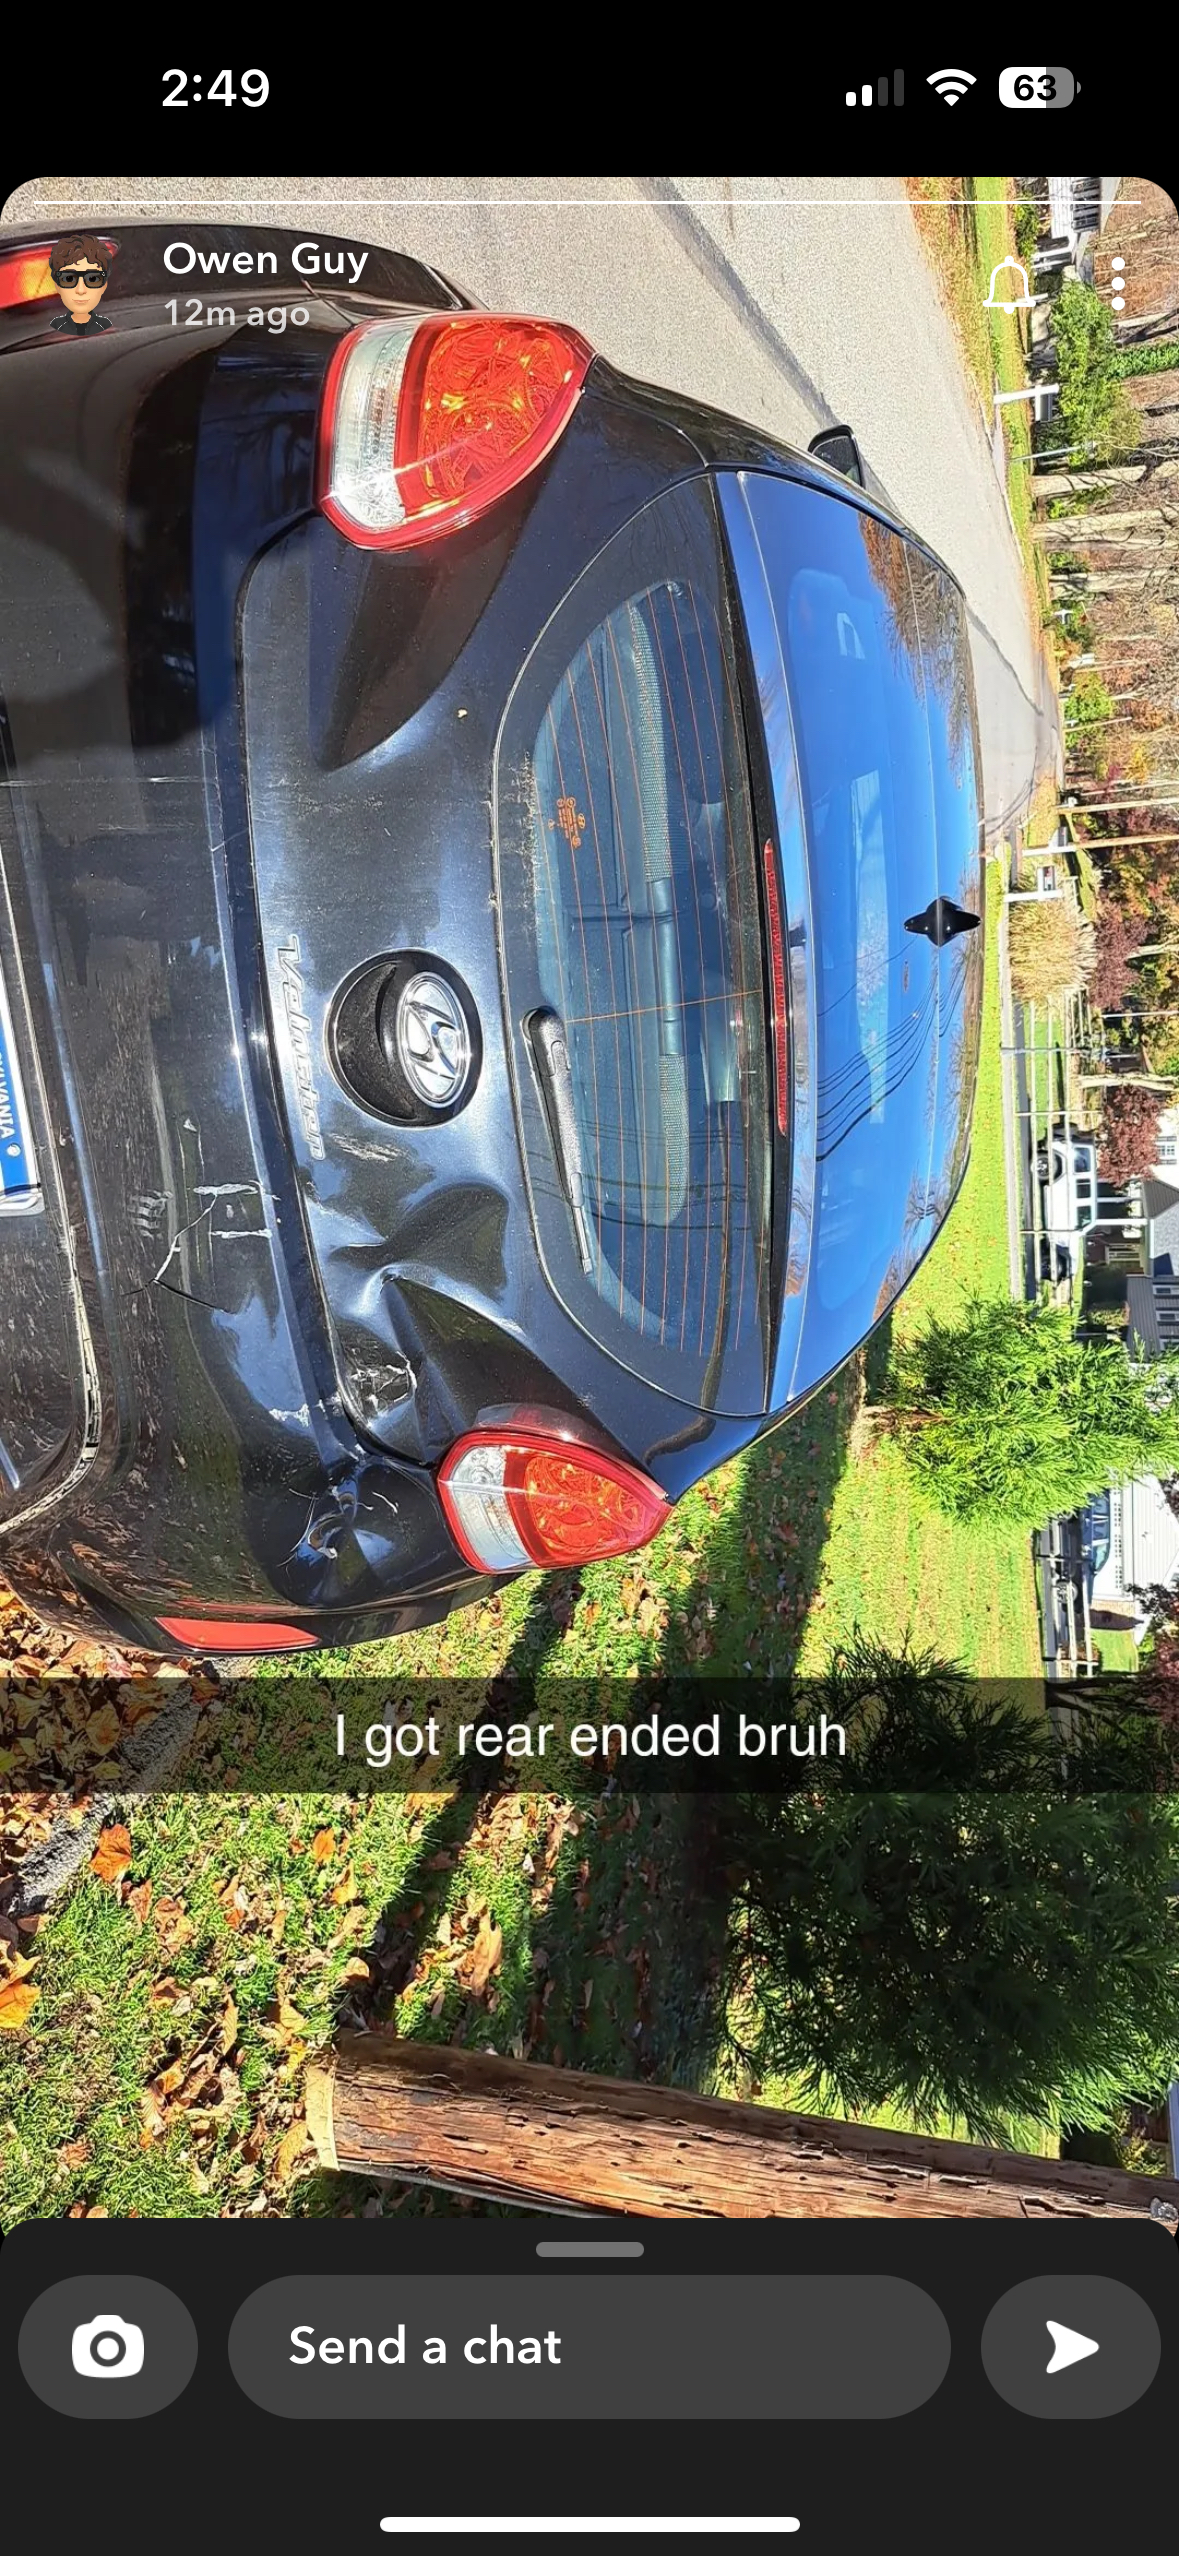 Owen Gentile rear-ended for being a little too special on the road